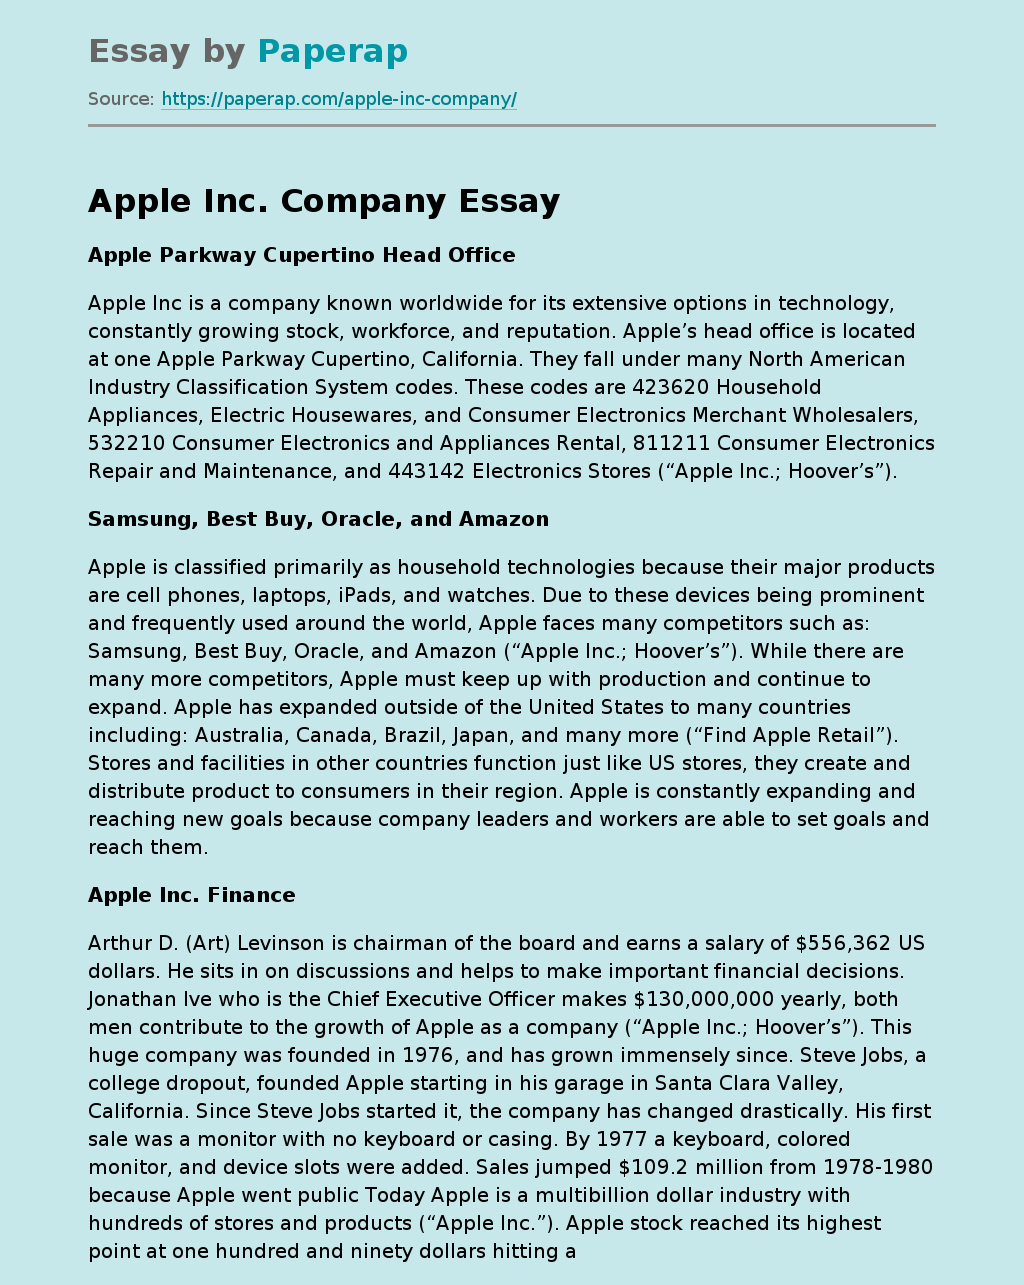 research papers on apple inc